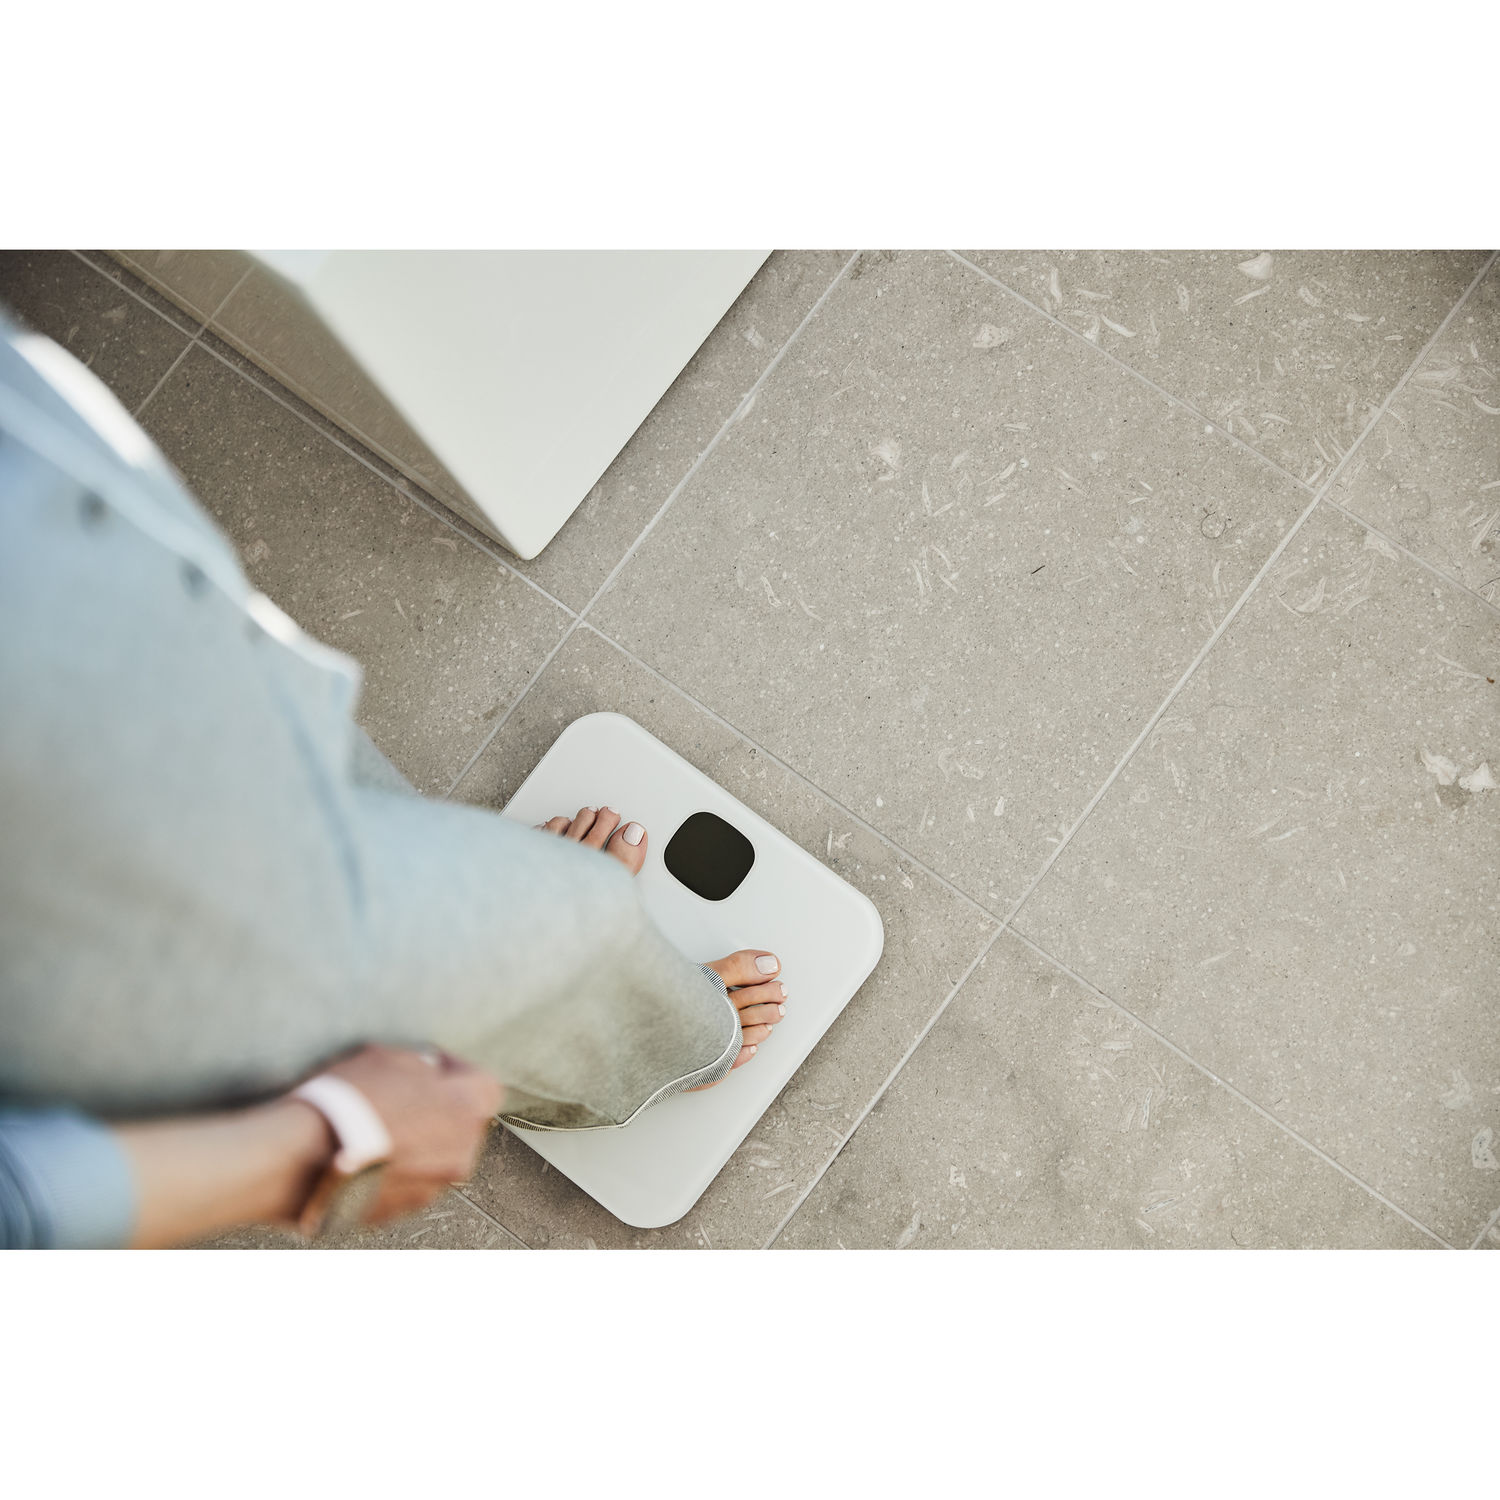 fitbit aria air bluetooth smart scale review